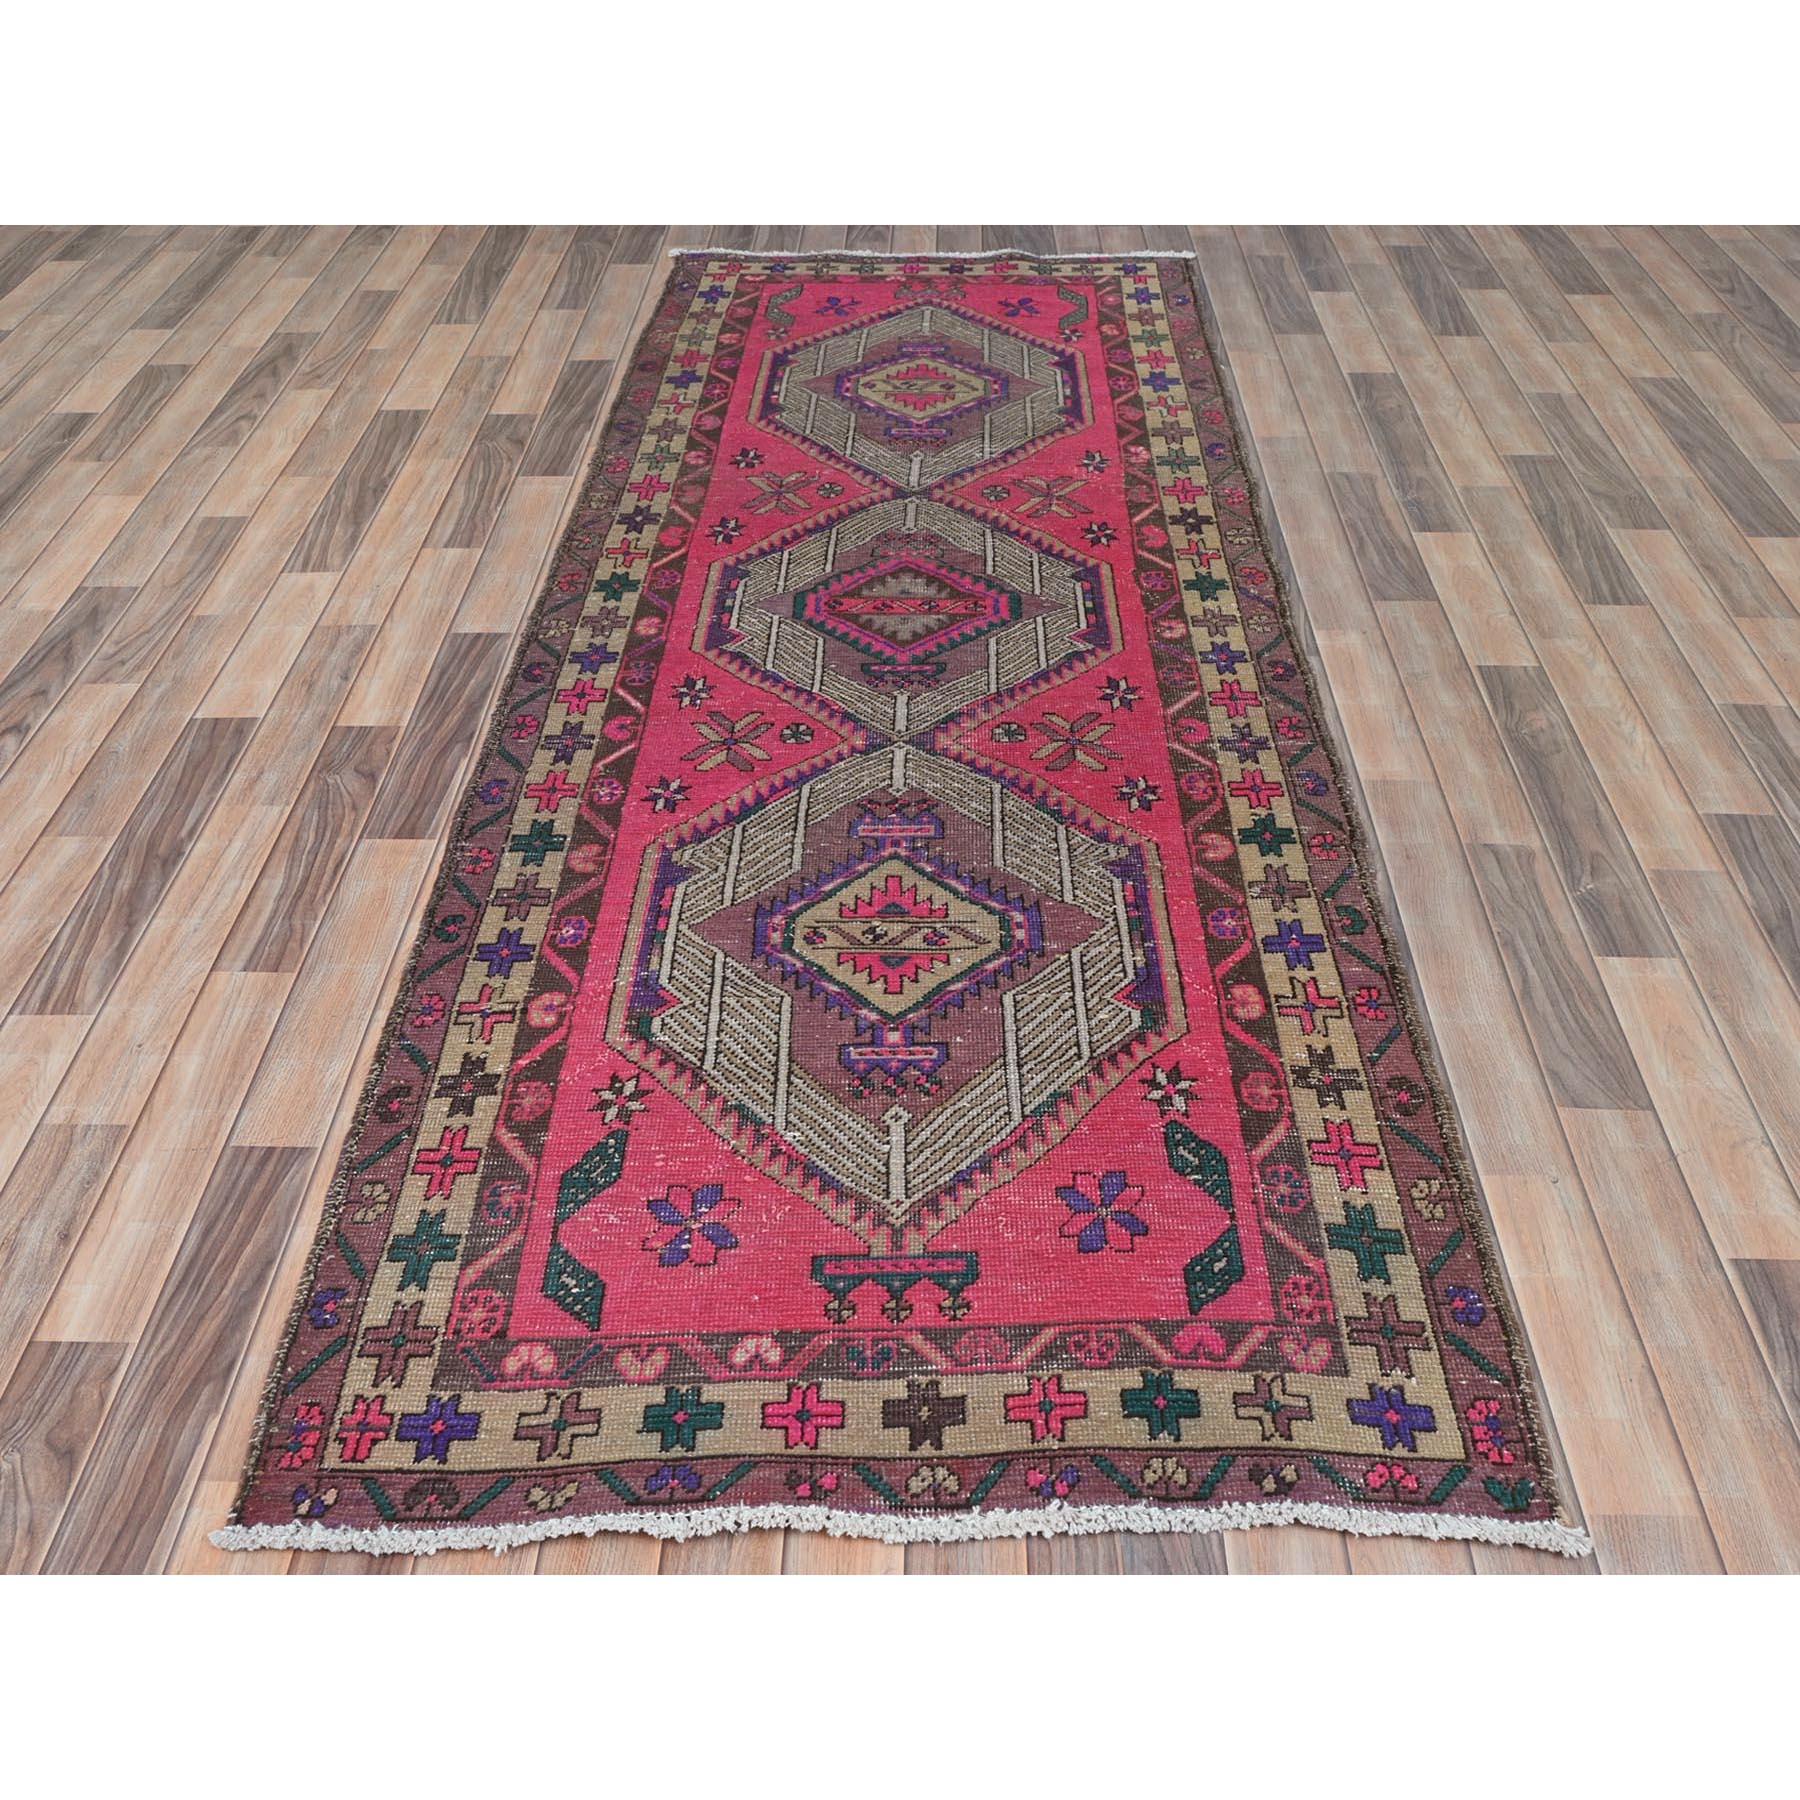 This fabulous Hand-Knotted carpet has been created and designed for extra strength and durability. This rug has been handcrafted for weeks in the traditional method that is used to make
Exact Rug Size in Feet and Inches : 3'7